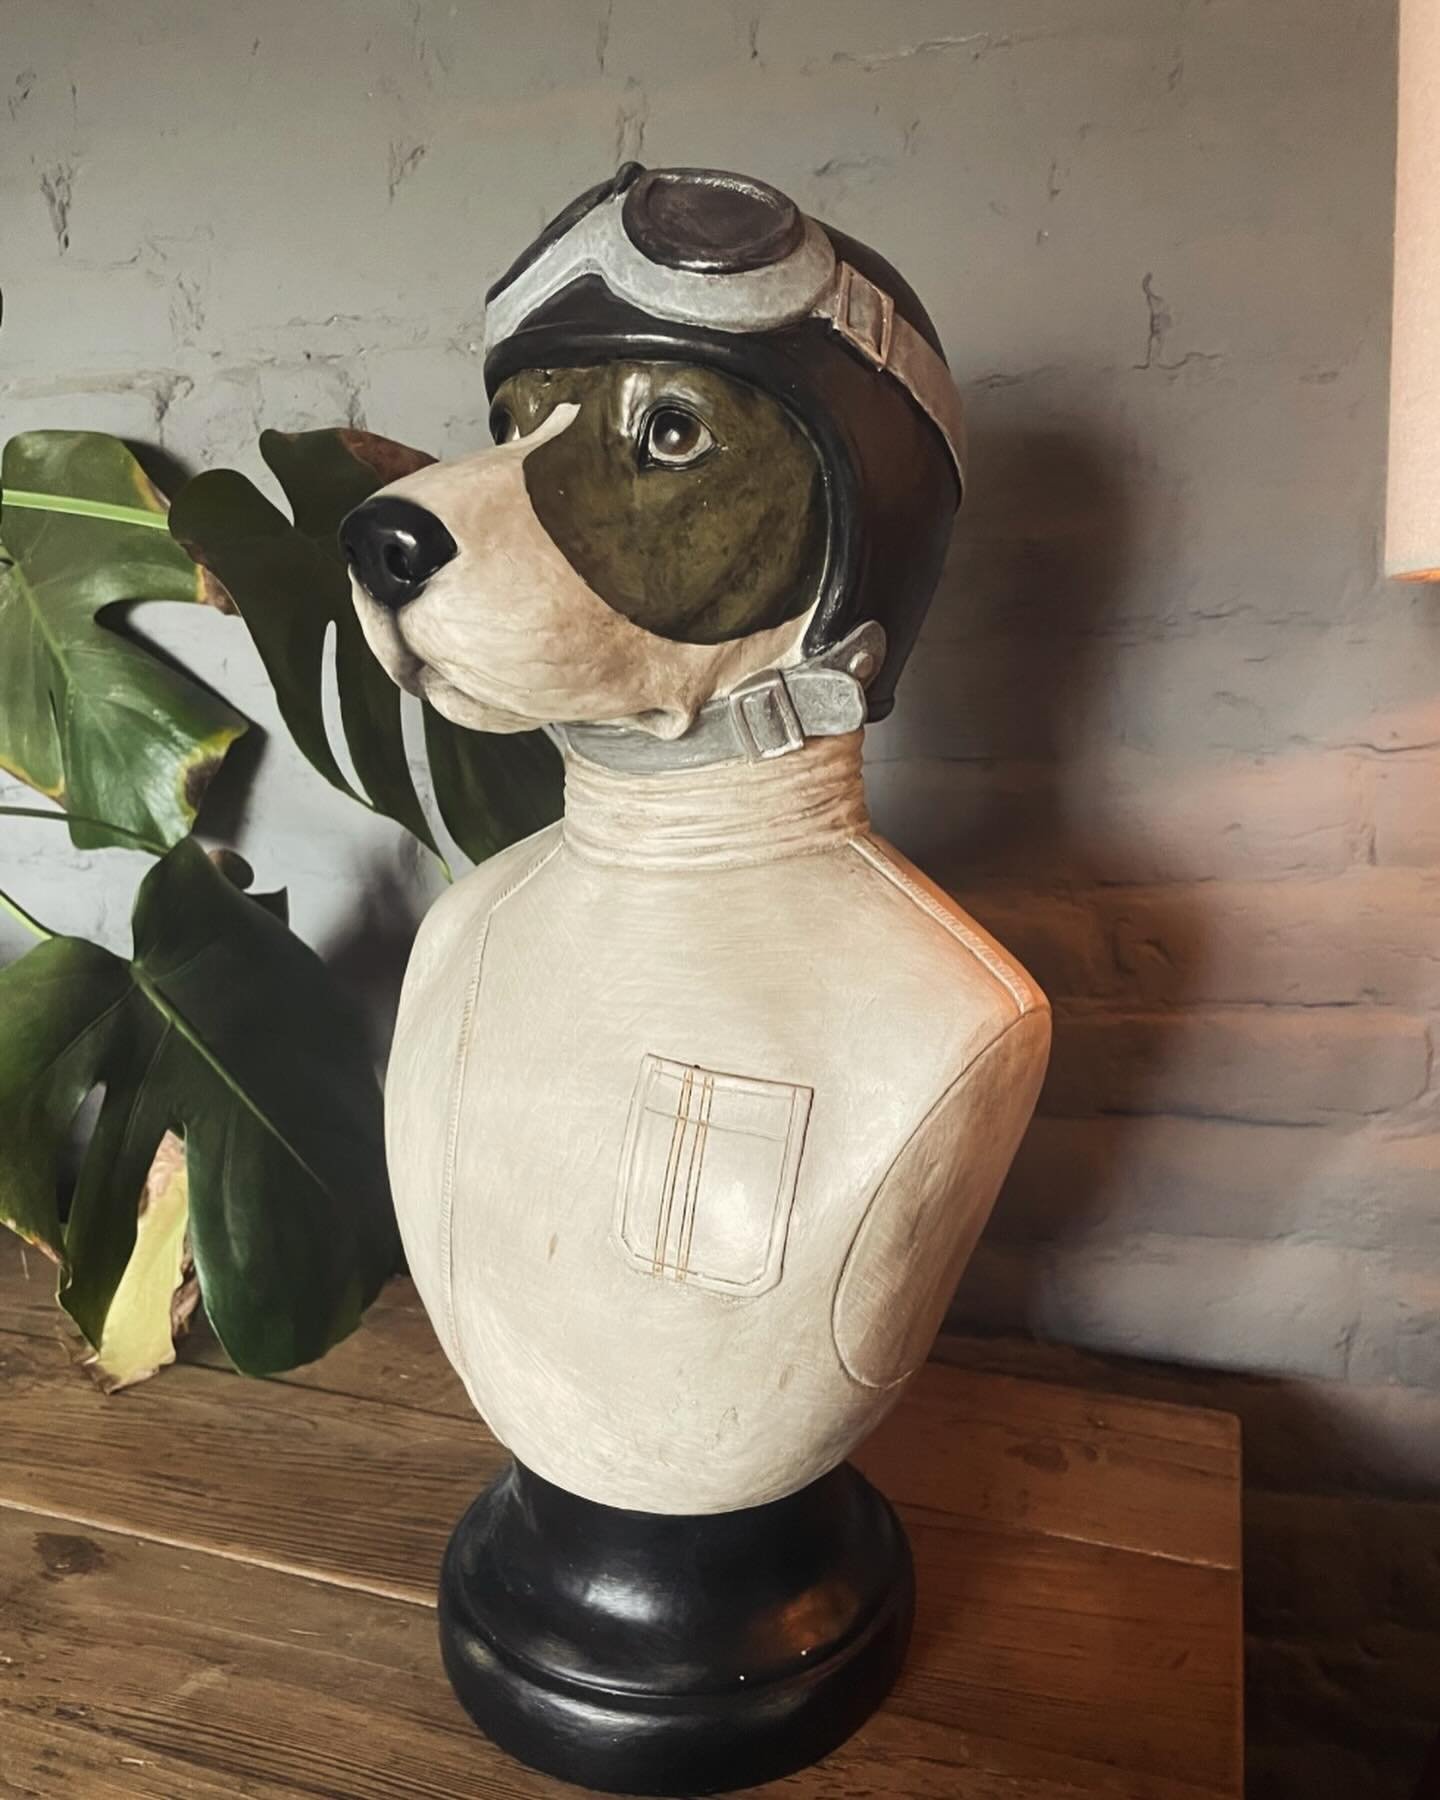 Our last racing dog bust has just been reduced to &pound;65!

#dog #dogsofinstagram #doglover #pointer #huntingdog #beagle #quirkyhome #dogdecor #country #britishracing #formula1